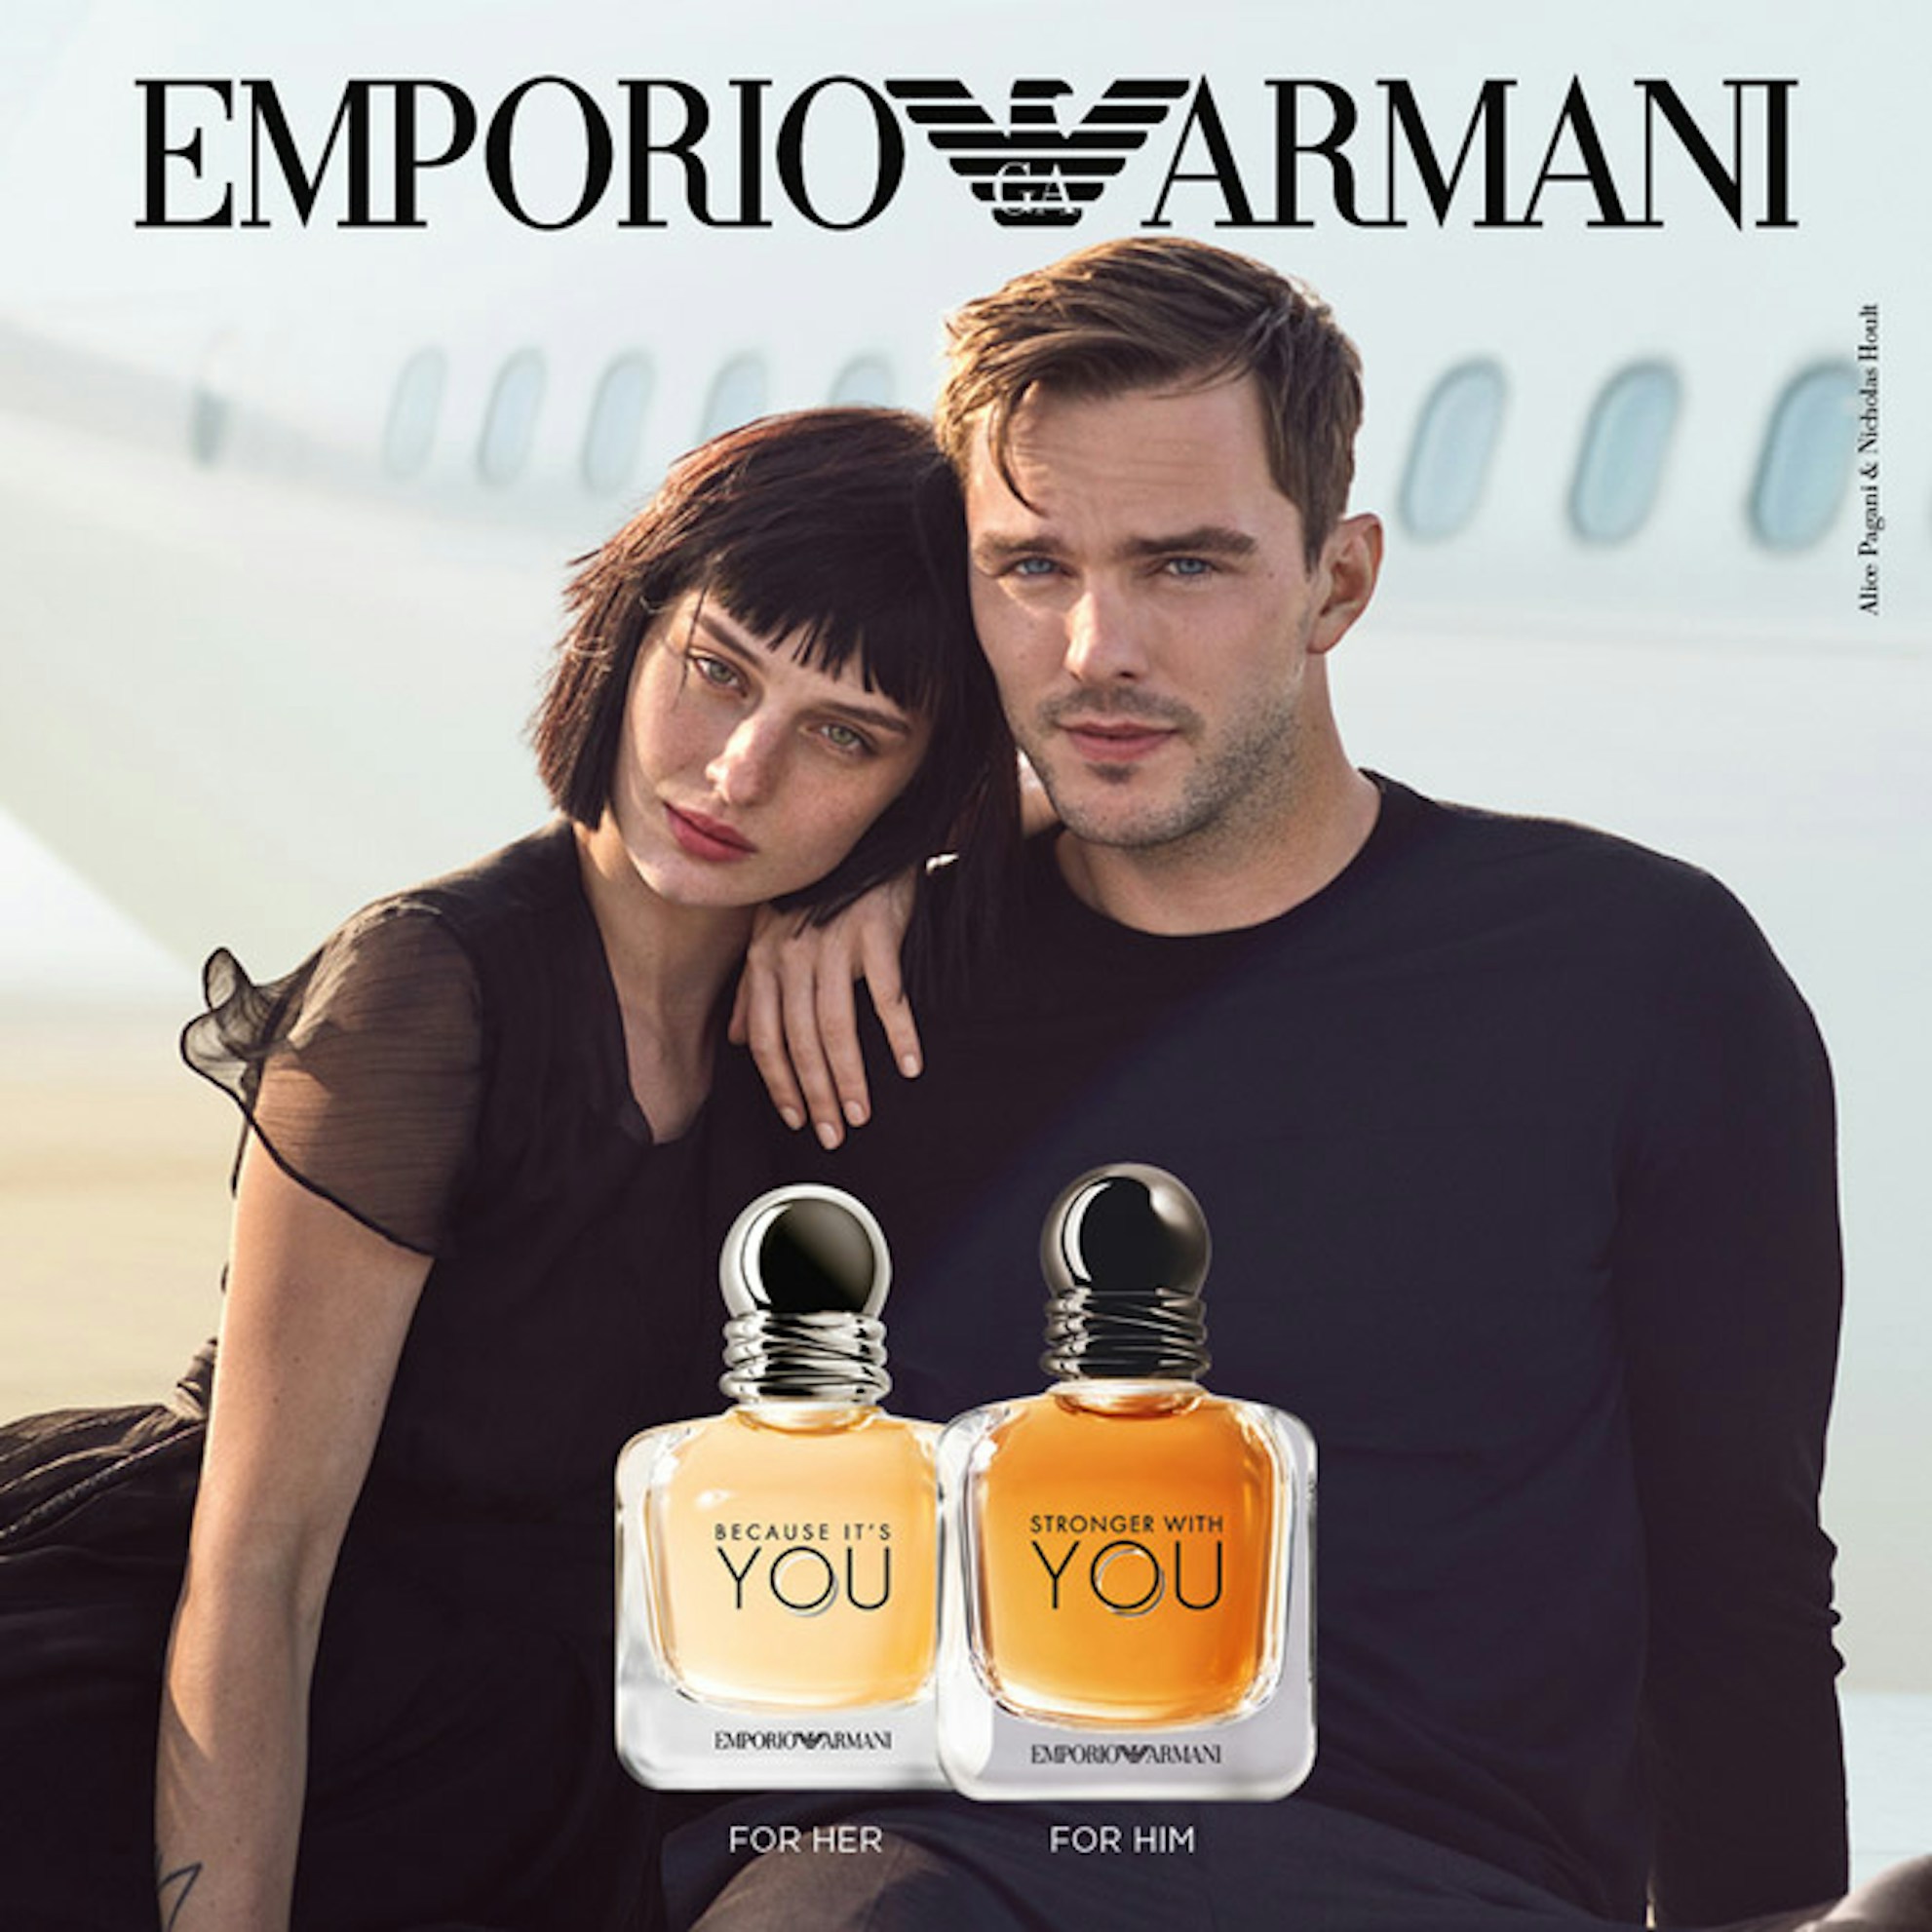 Arriba 66+ imagen armani stronger with you for him - Abzlocal.mx